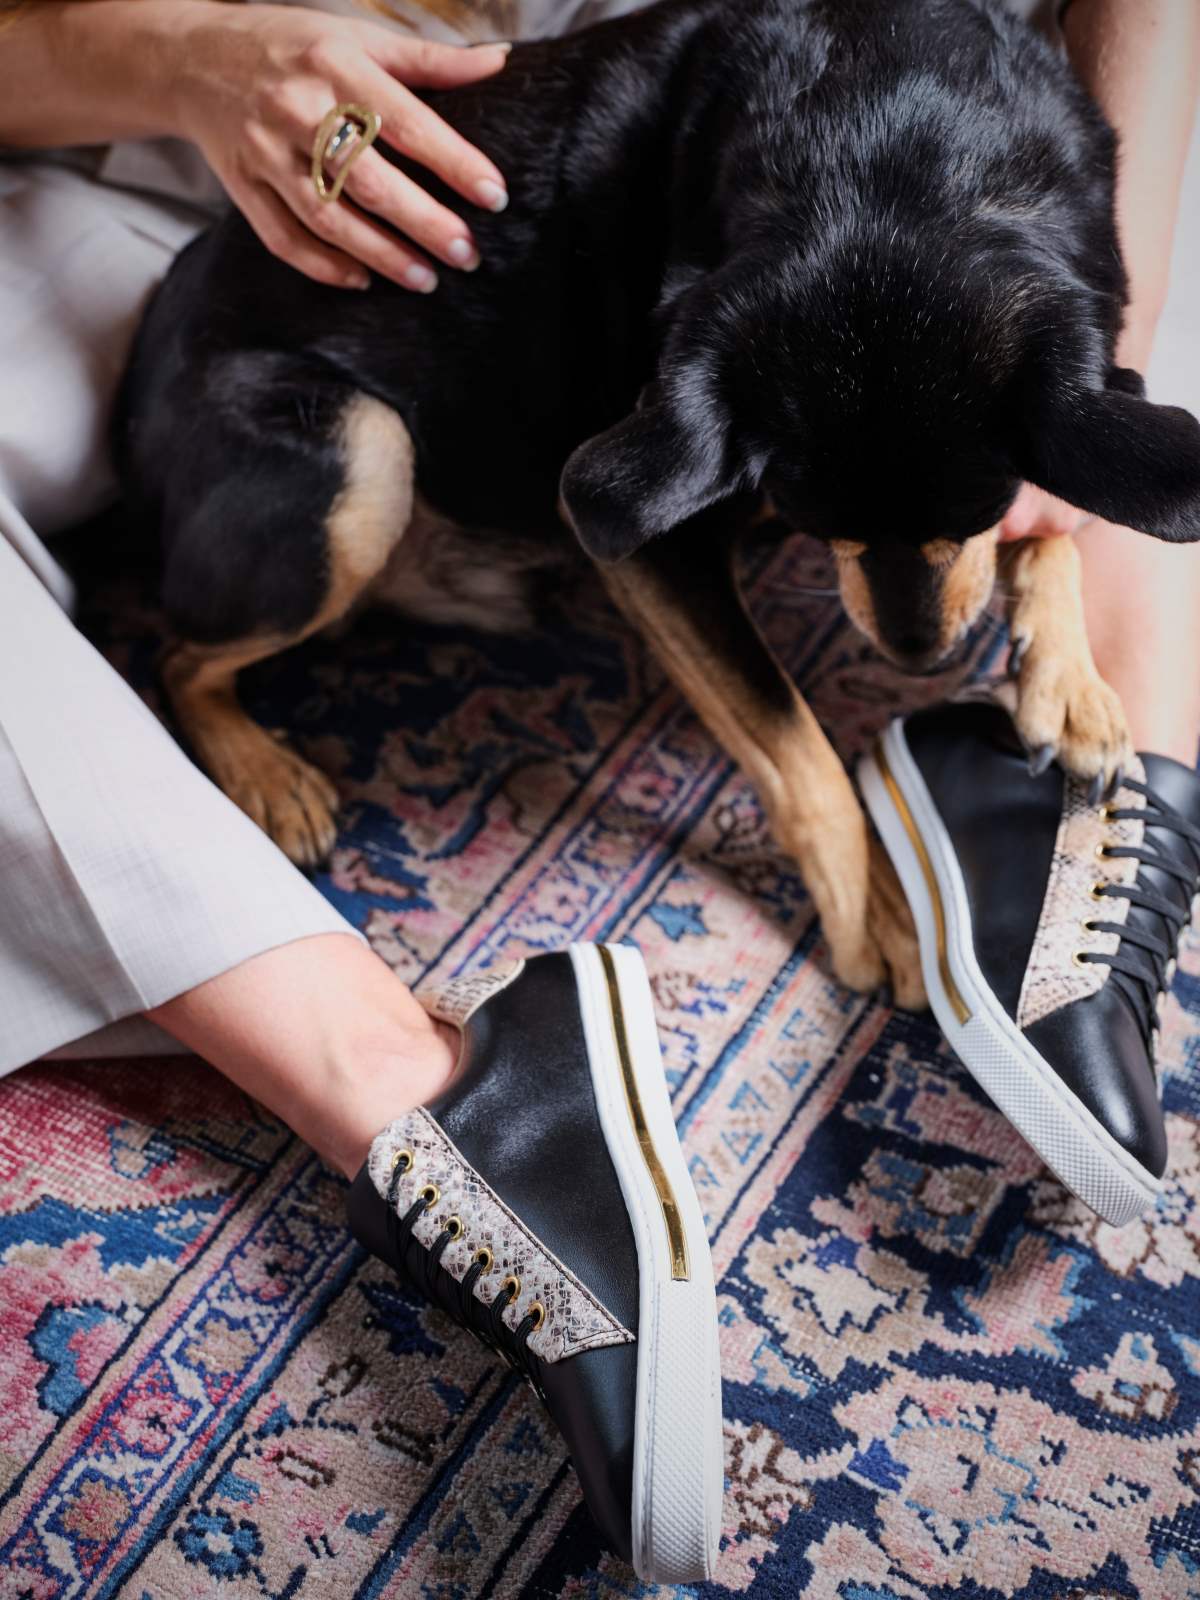 Black Vegan Leather Shoes With Dog. Anne Schollenberger.